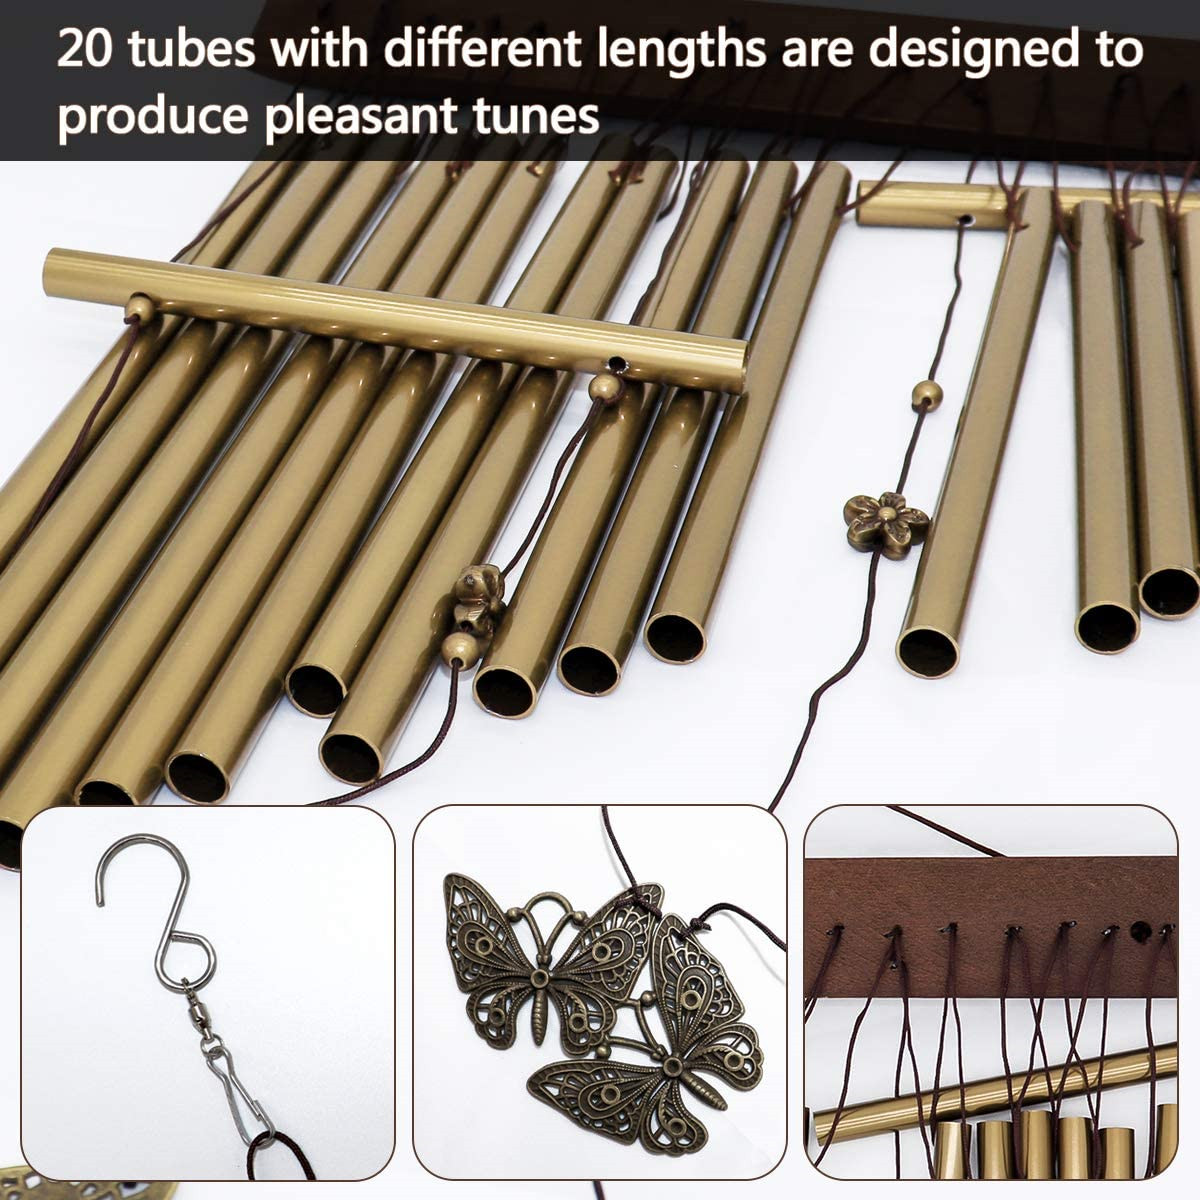 Outdoor-Wind-Chimes-Melodic-Tones-Butterfly-Harp-Wind-Chimes-Handmade-Wood-for-Home-Garden-Patio-Dec-1801315-6